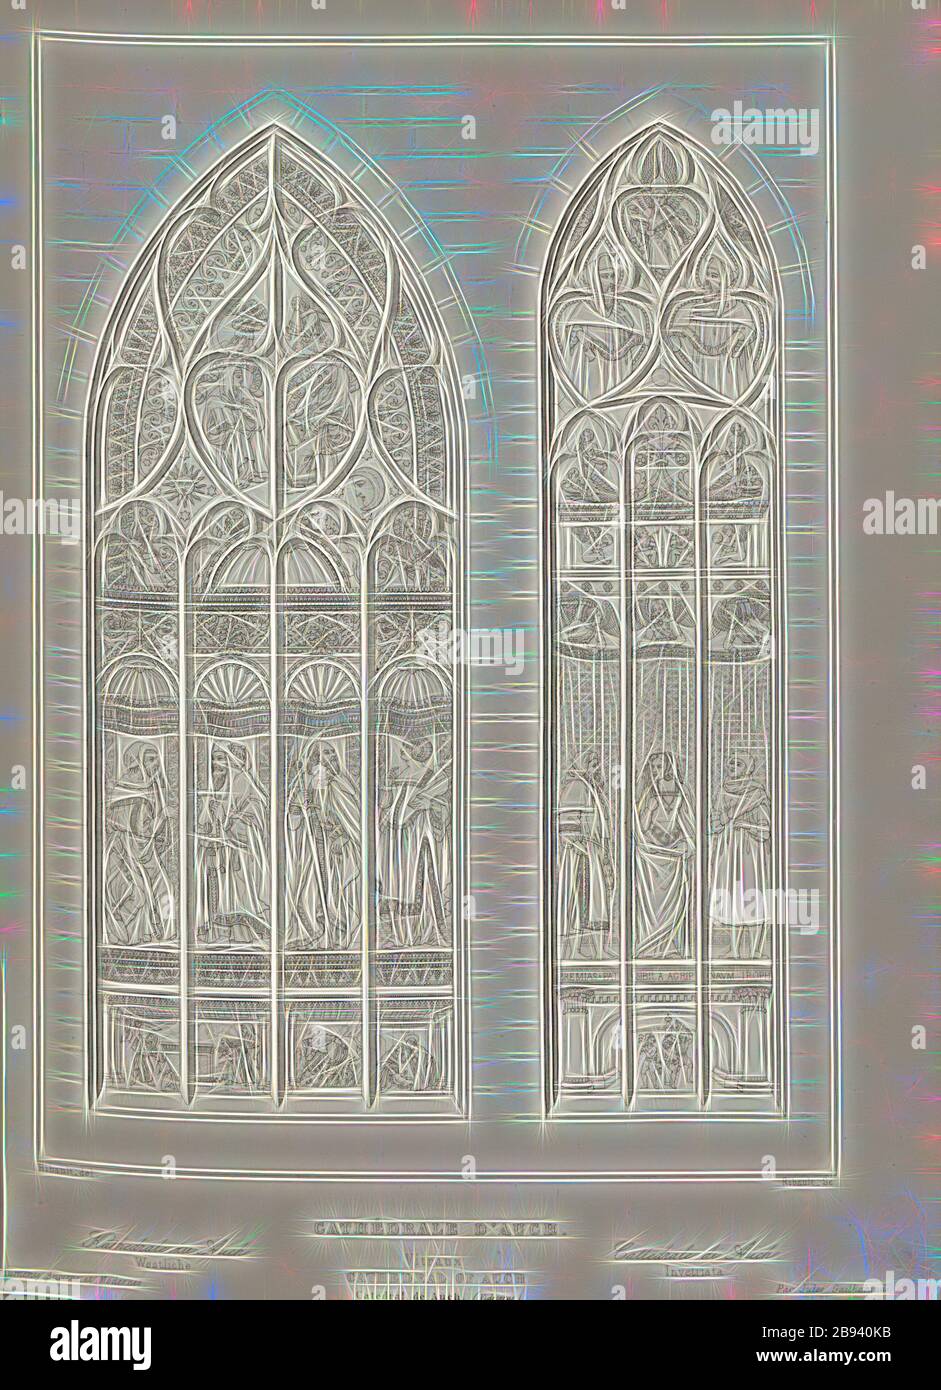 Auch Cathedral. Stained Glass, Window of the Sainte-Marie d'Auch cathedral Also in Auch, signed: Ribault del, Ribault sc, Fig. 24, p. 139, Ribault, Auguste Louis François (del. et sc.), 1853, Jules Gailhabaud: Monuments anciens et modernes: collection formant une histoire de l'architecture des différents peuples à toutes les époques. Paris: Librairie de Firmin Didot frères, 1853, Reimagined by Gibon, design of warm cheerful glowing of brightness and light rays radiance. Classic art reinvented with a modern twist. Photography inspired by futurism, embracing dynamic energy of modern technology, Stock Photo